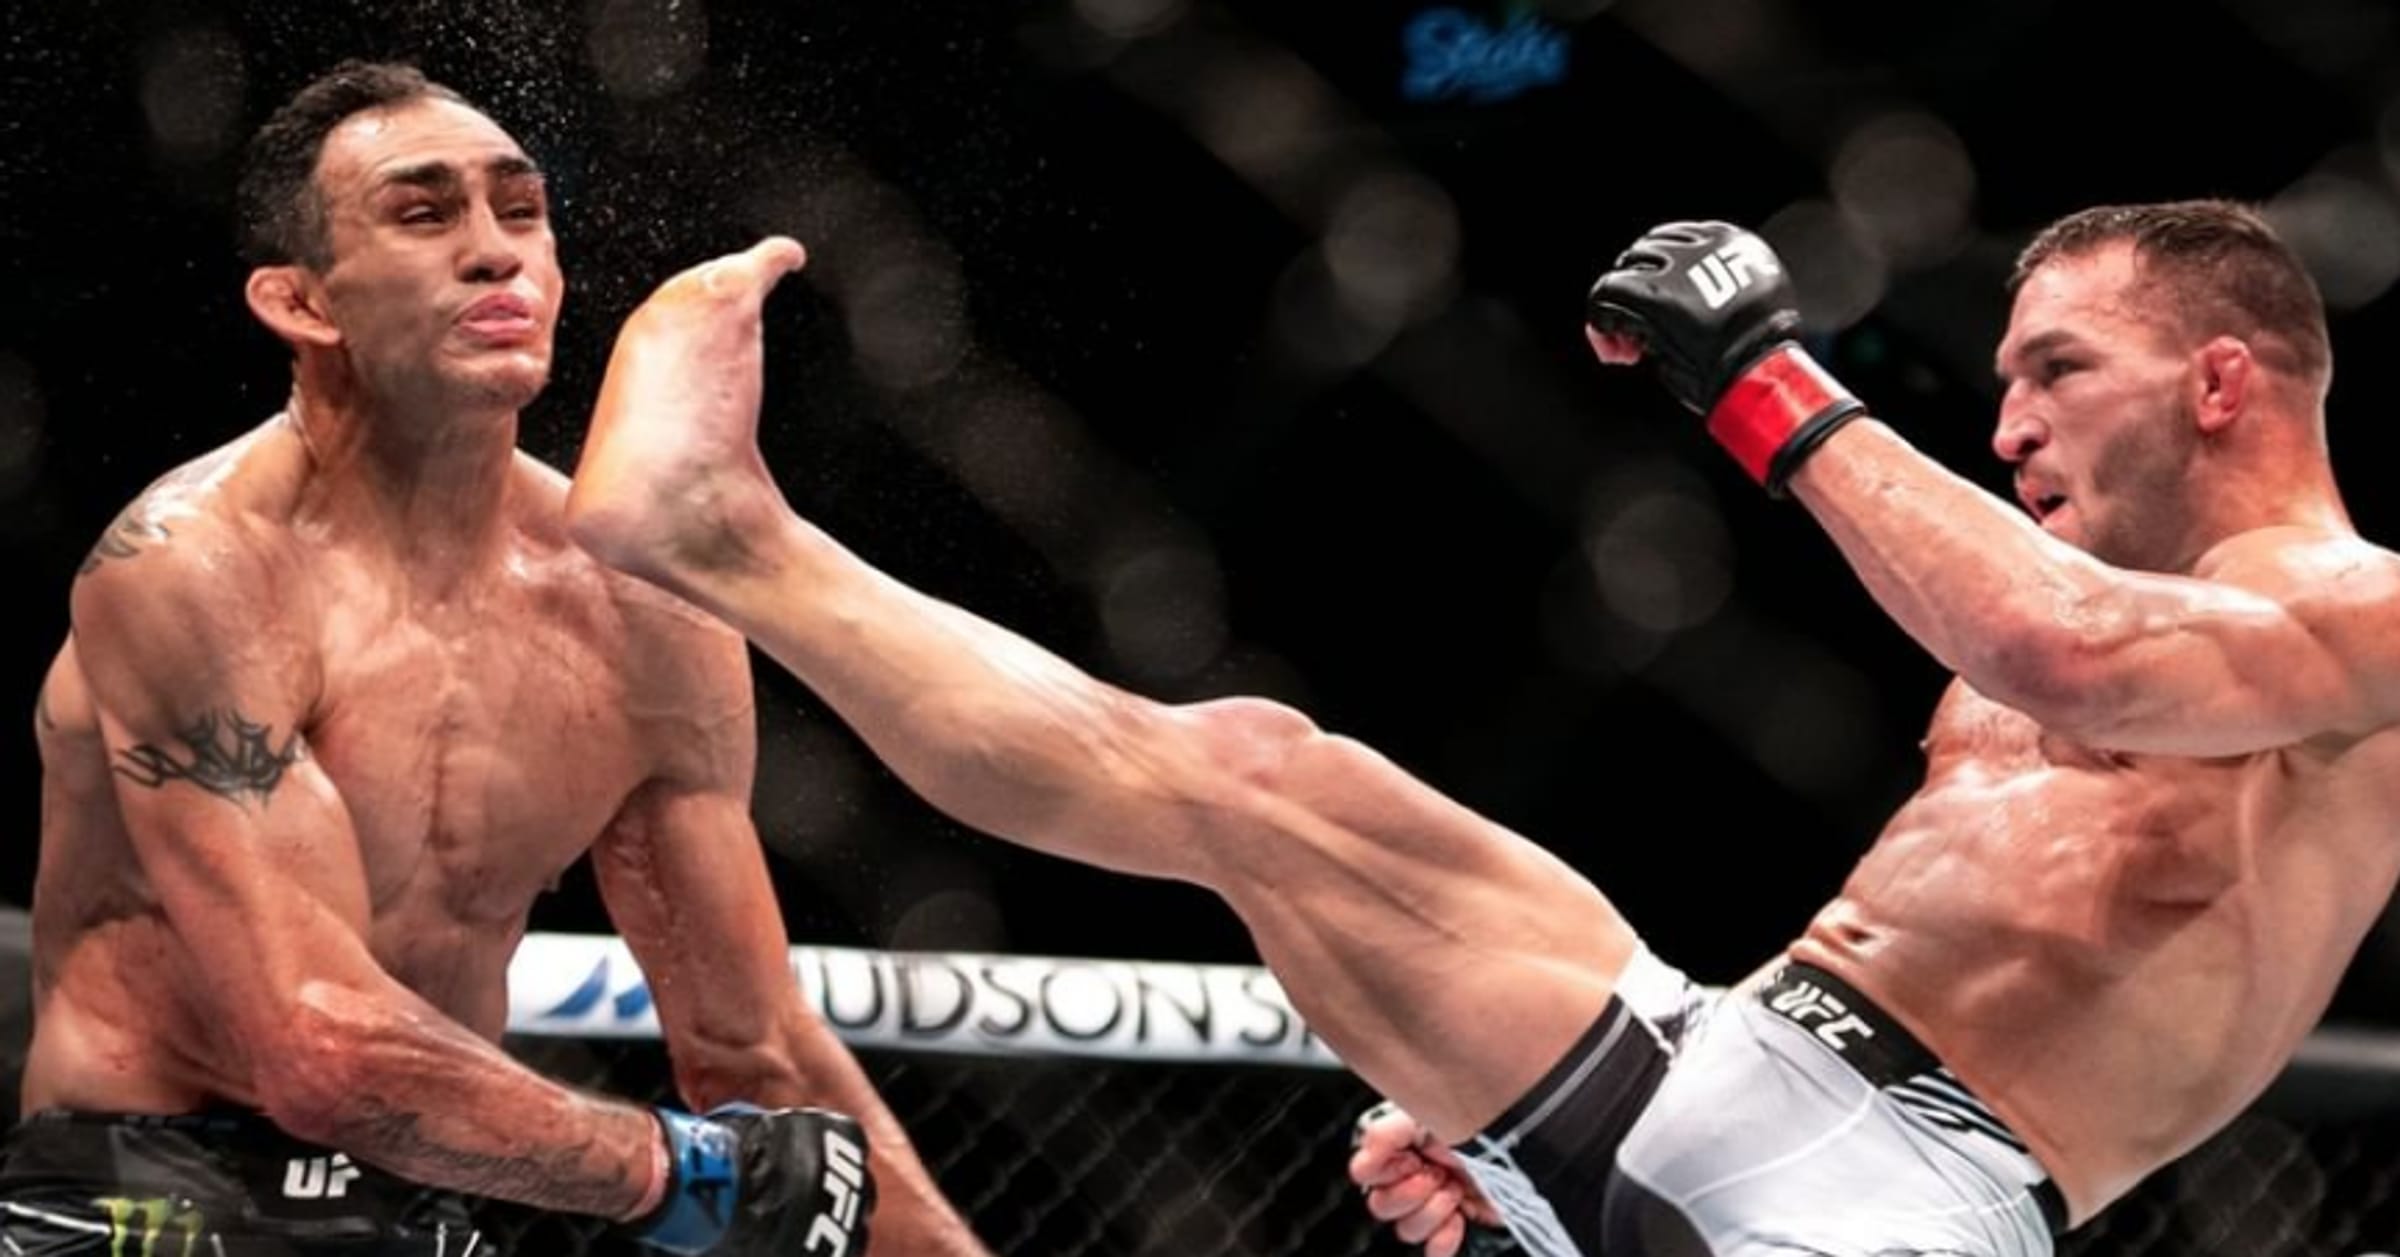 MMA Top 10: the Best Male Athletes Competing in Mixed Martial Arts Today